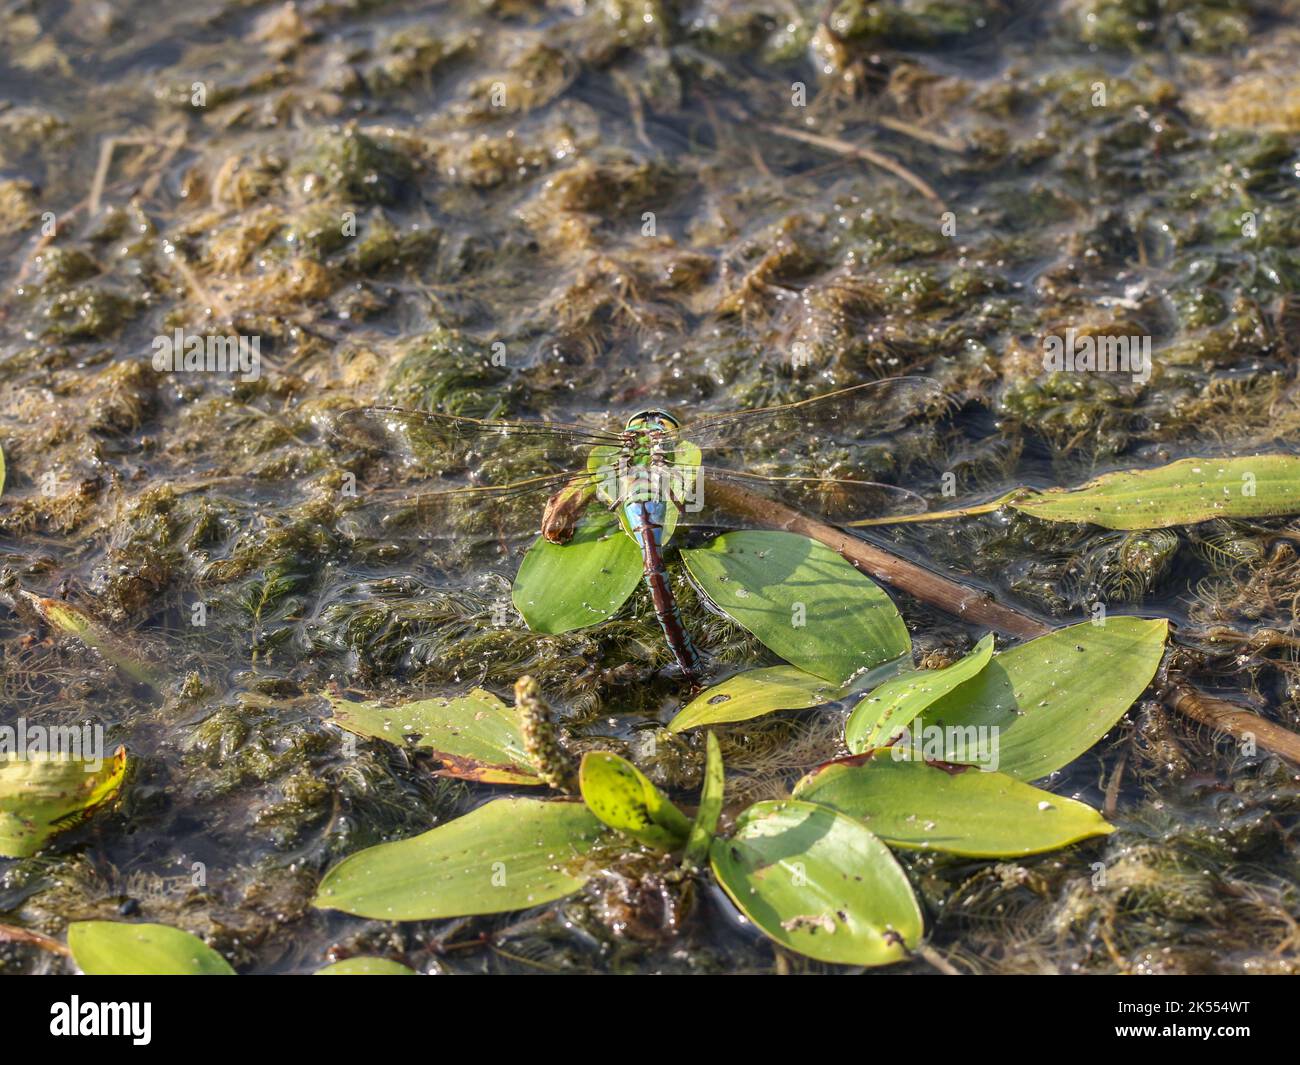 The blue emperor single female (latin name: Anax imperator) laying eggs in fresh water pond with pondweed in the Special nature reserve Gornje Podunav Stock Photo